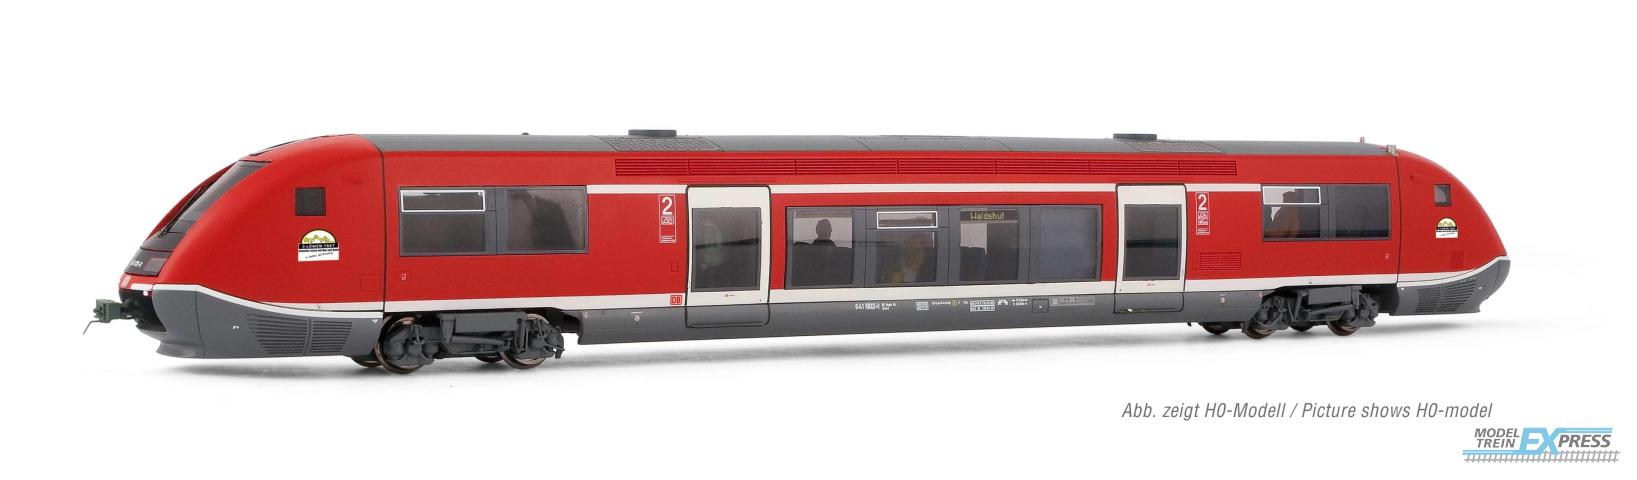 Arnold 2455 DB AB, 641 002-1 red livery